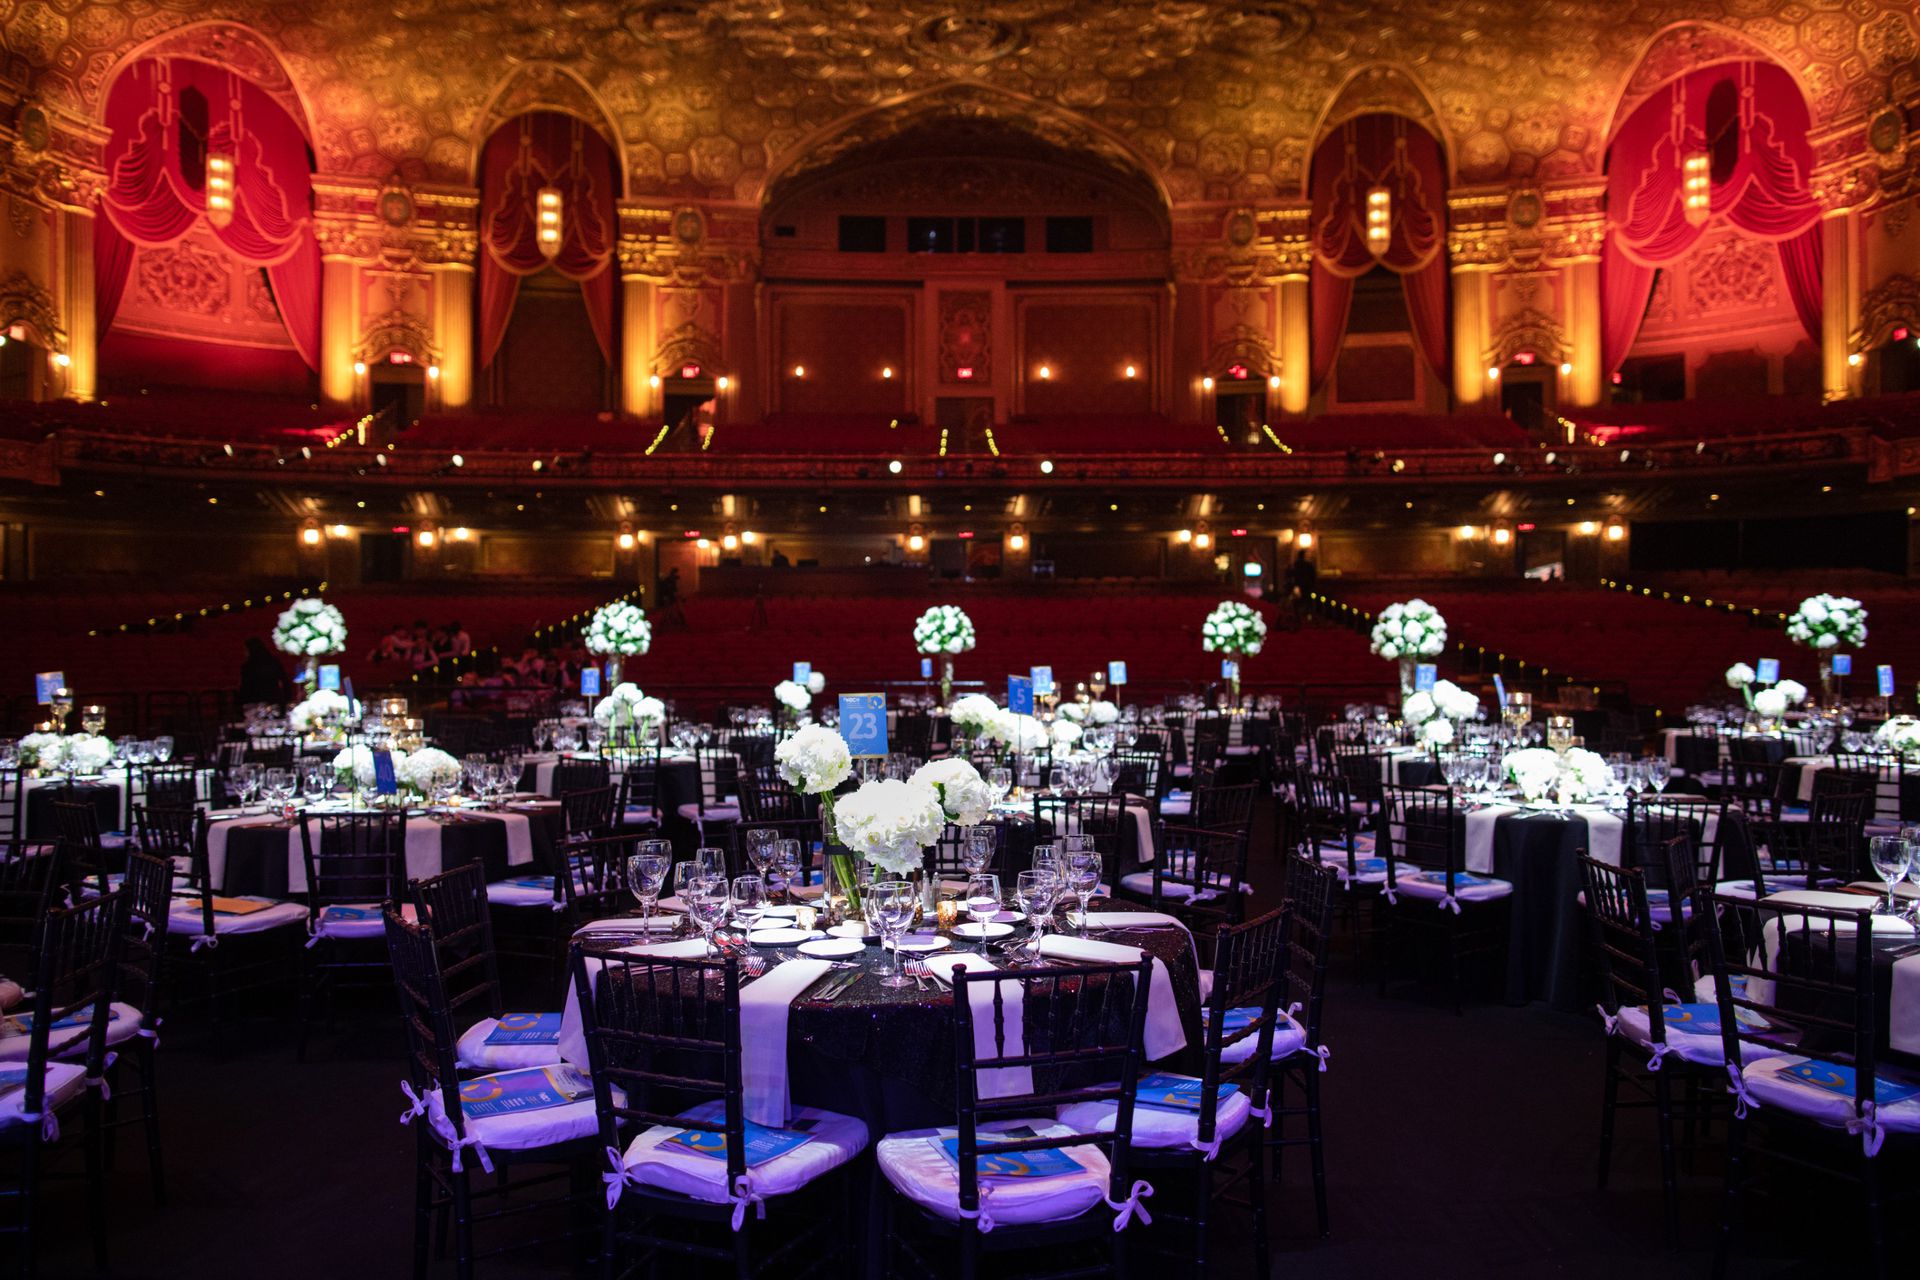 Large ornate room with many round tables with centerpieces